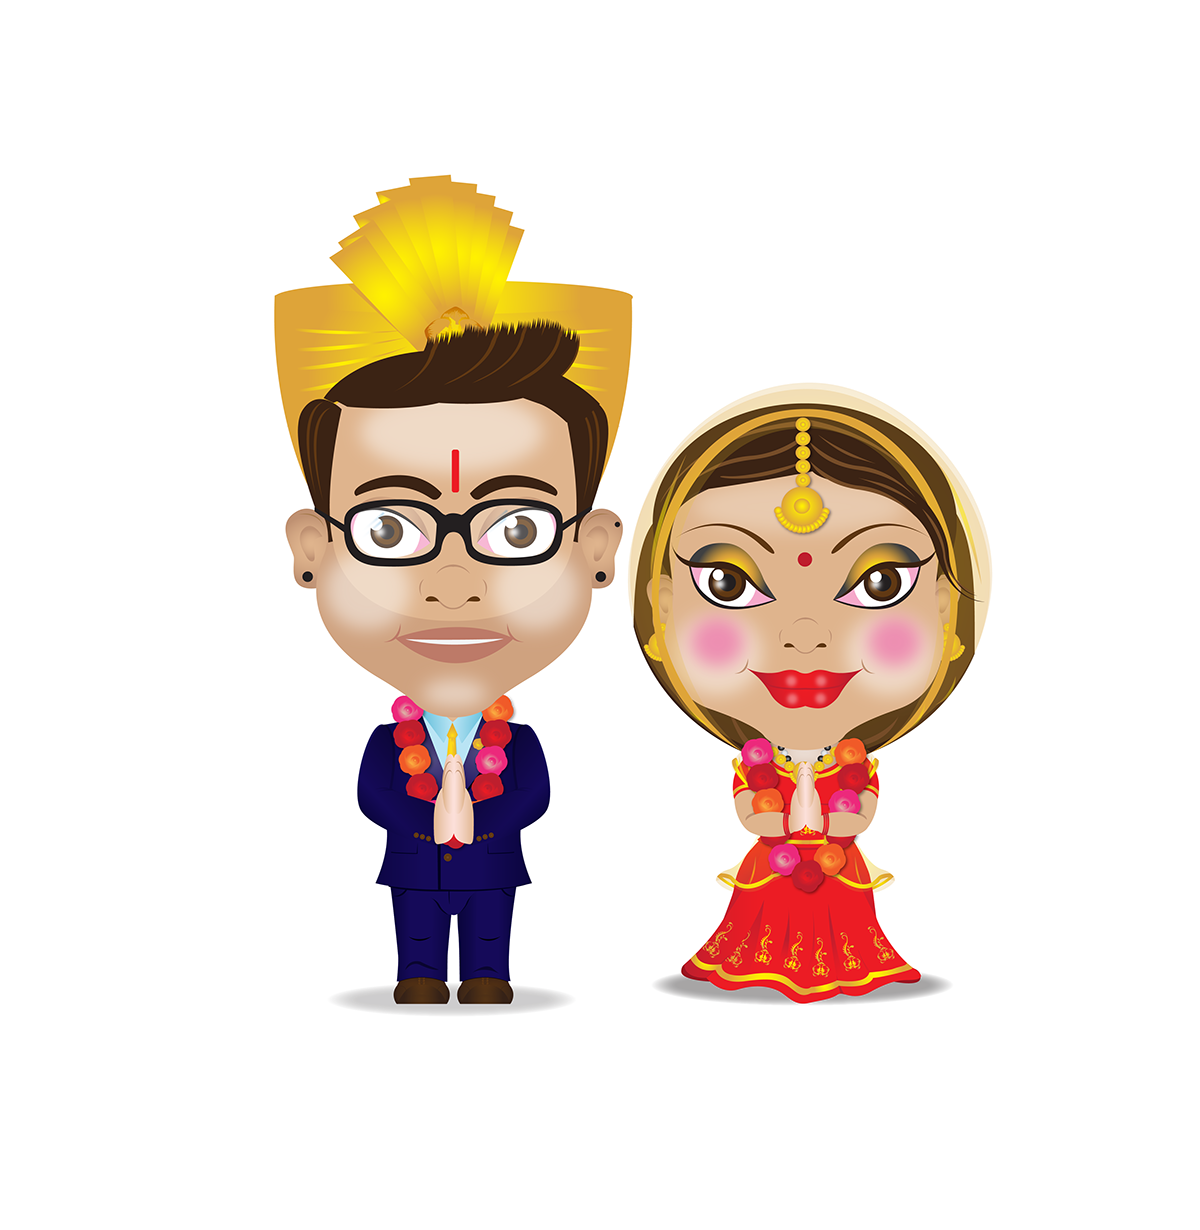 Marriage clipart early marriage. Character design modern hindu